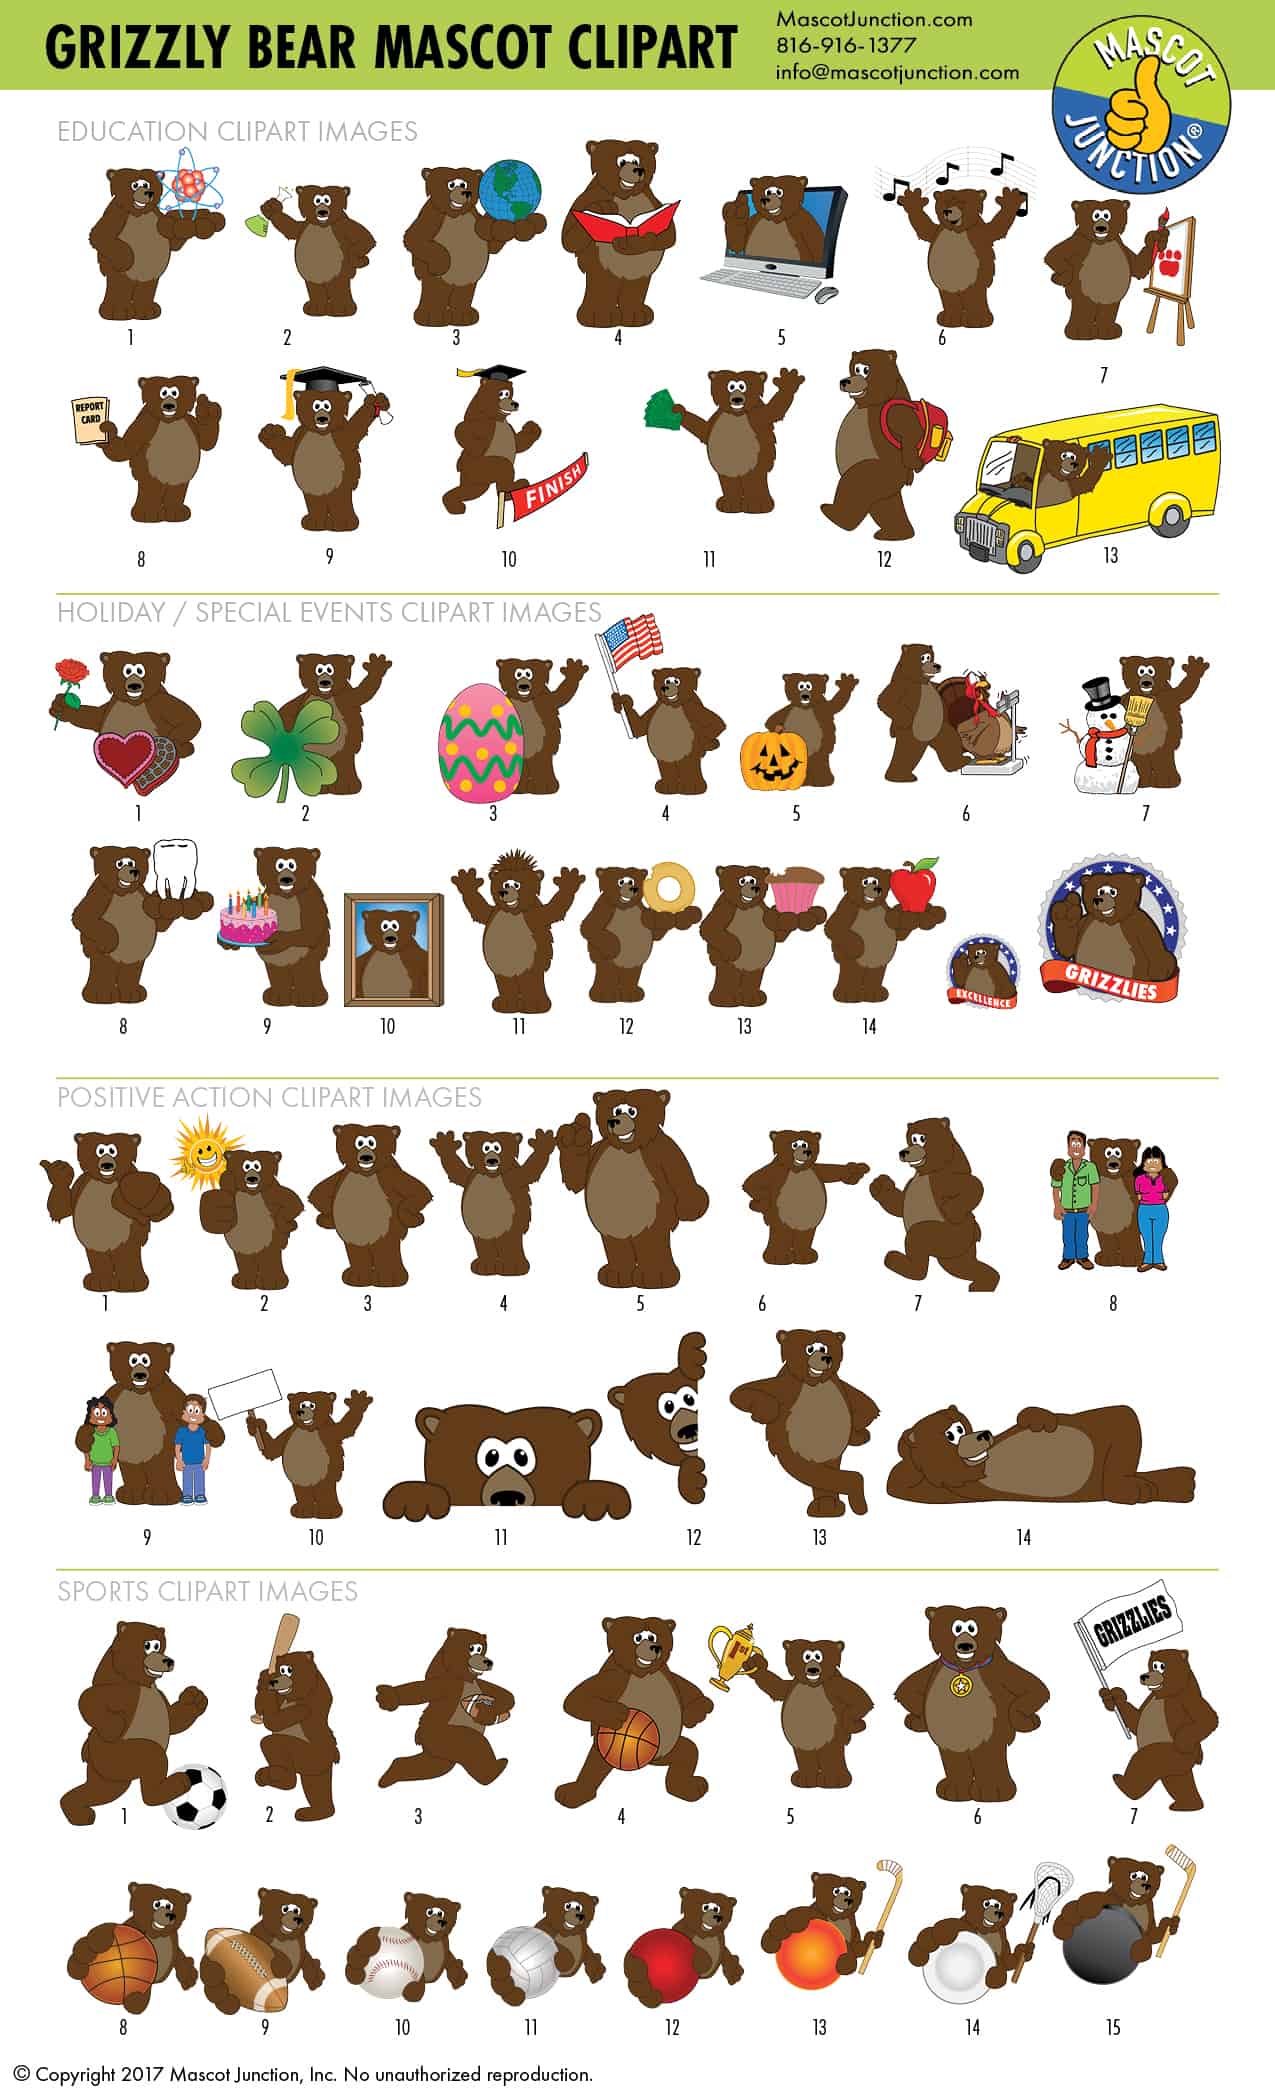 Grizzly Bear Mascot Clipart